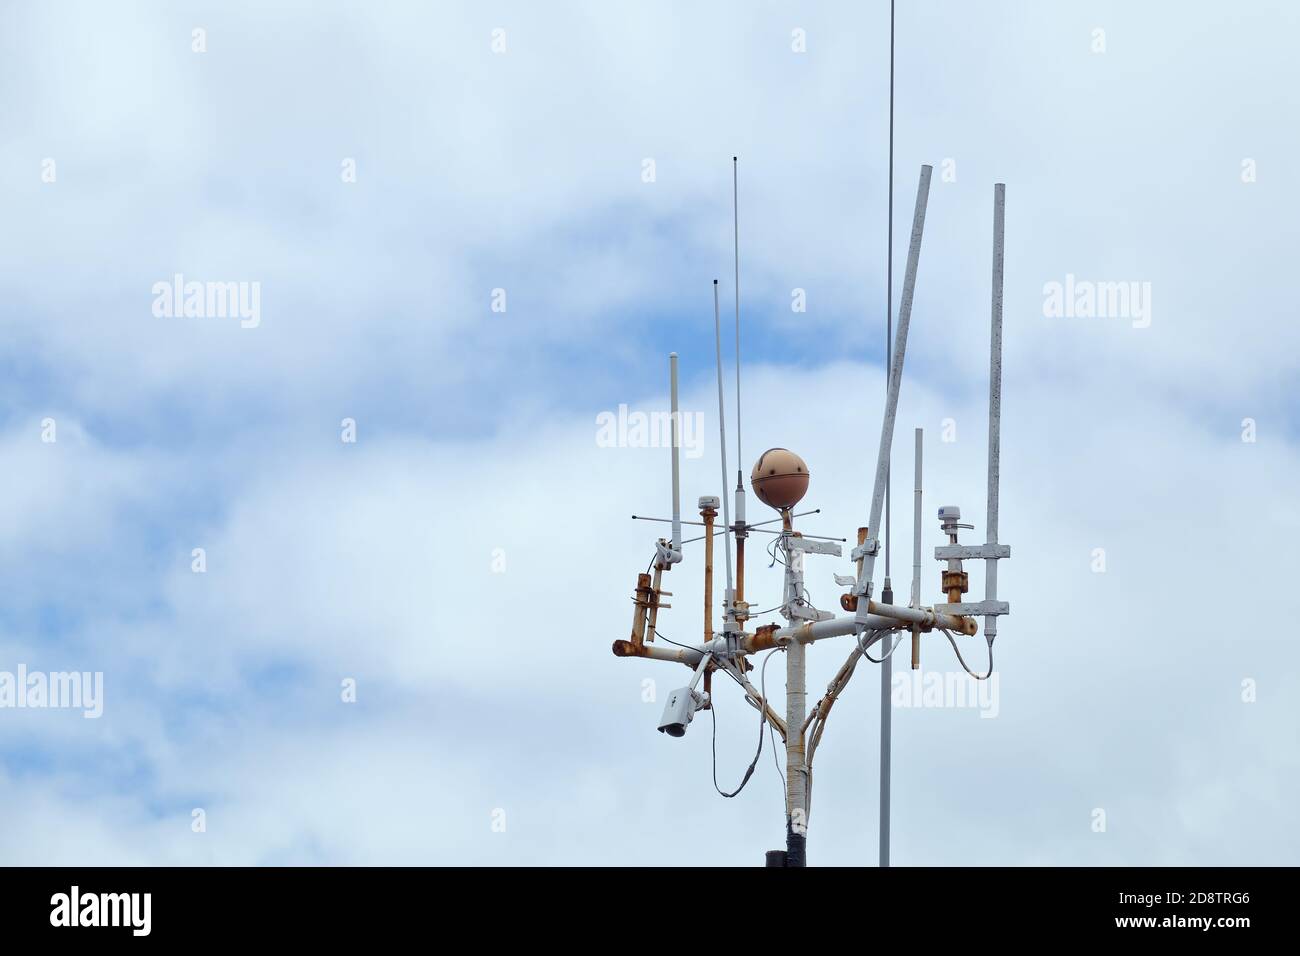 Devices meteorological station on the background of the cloudy sky. Scotland Stock Photo